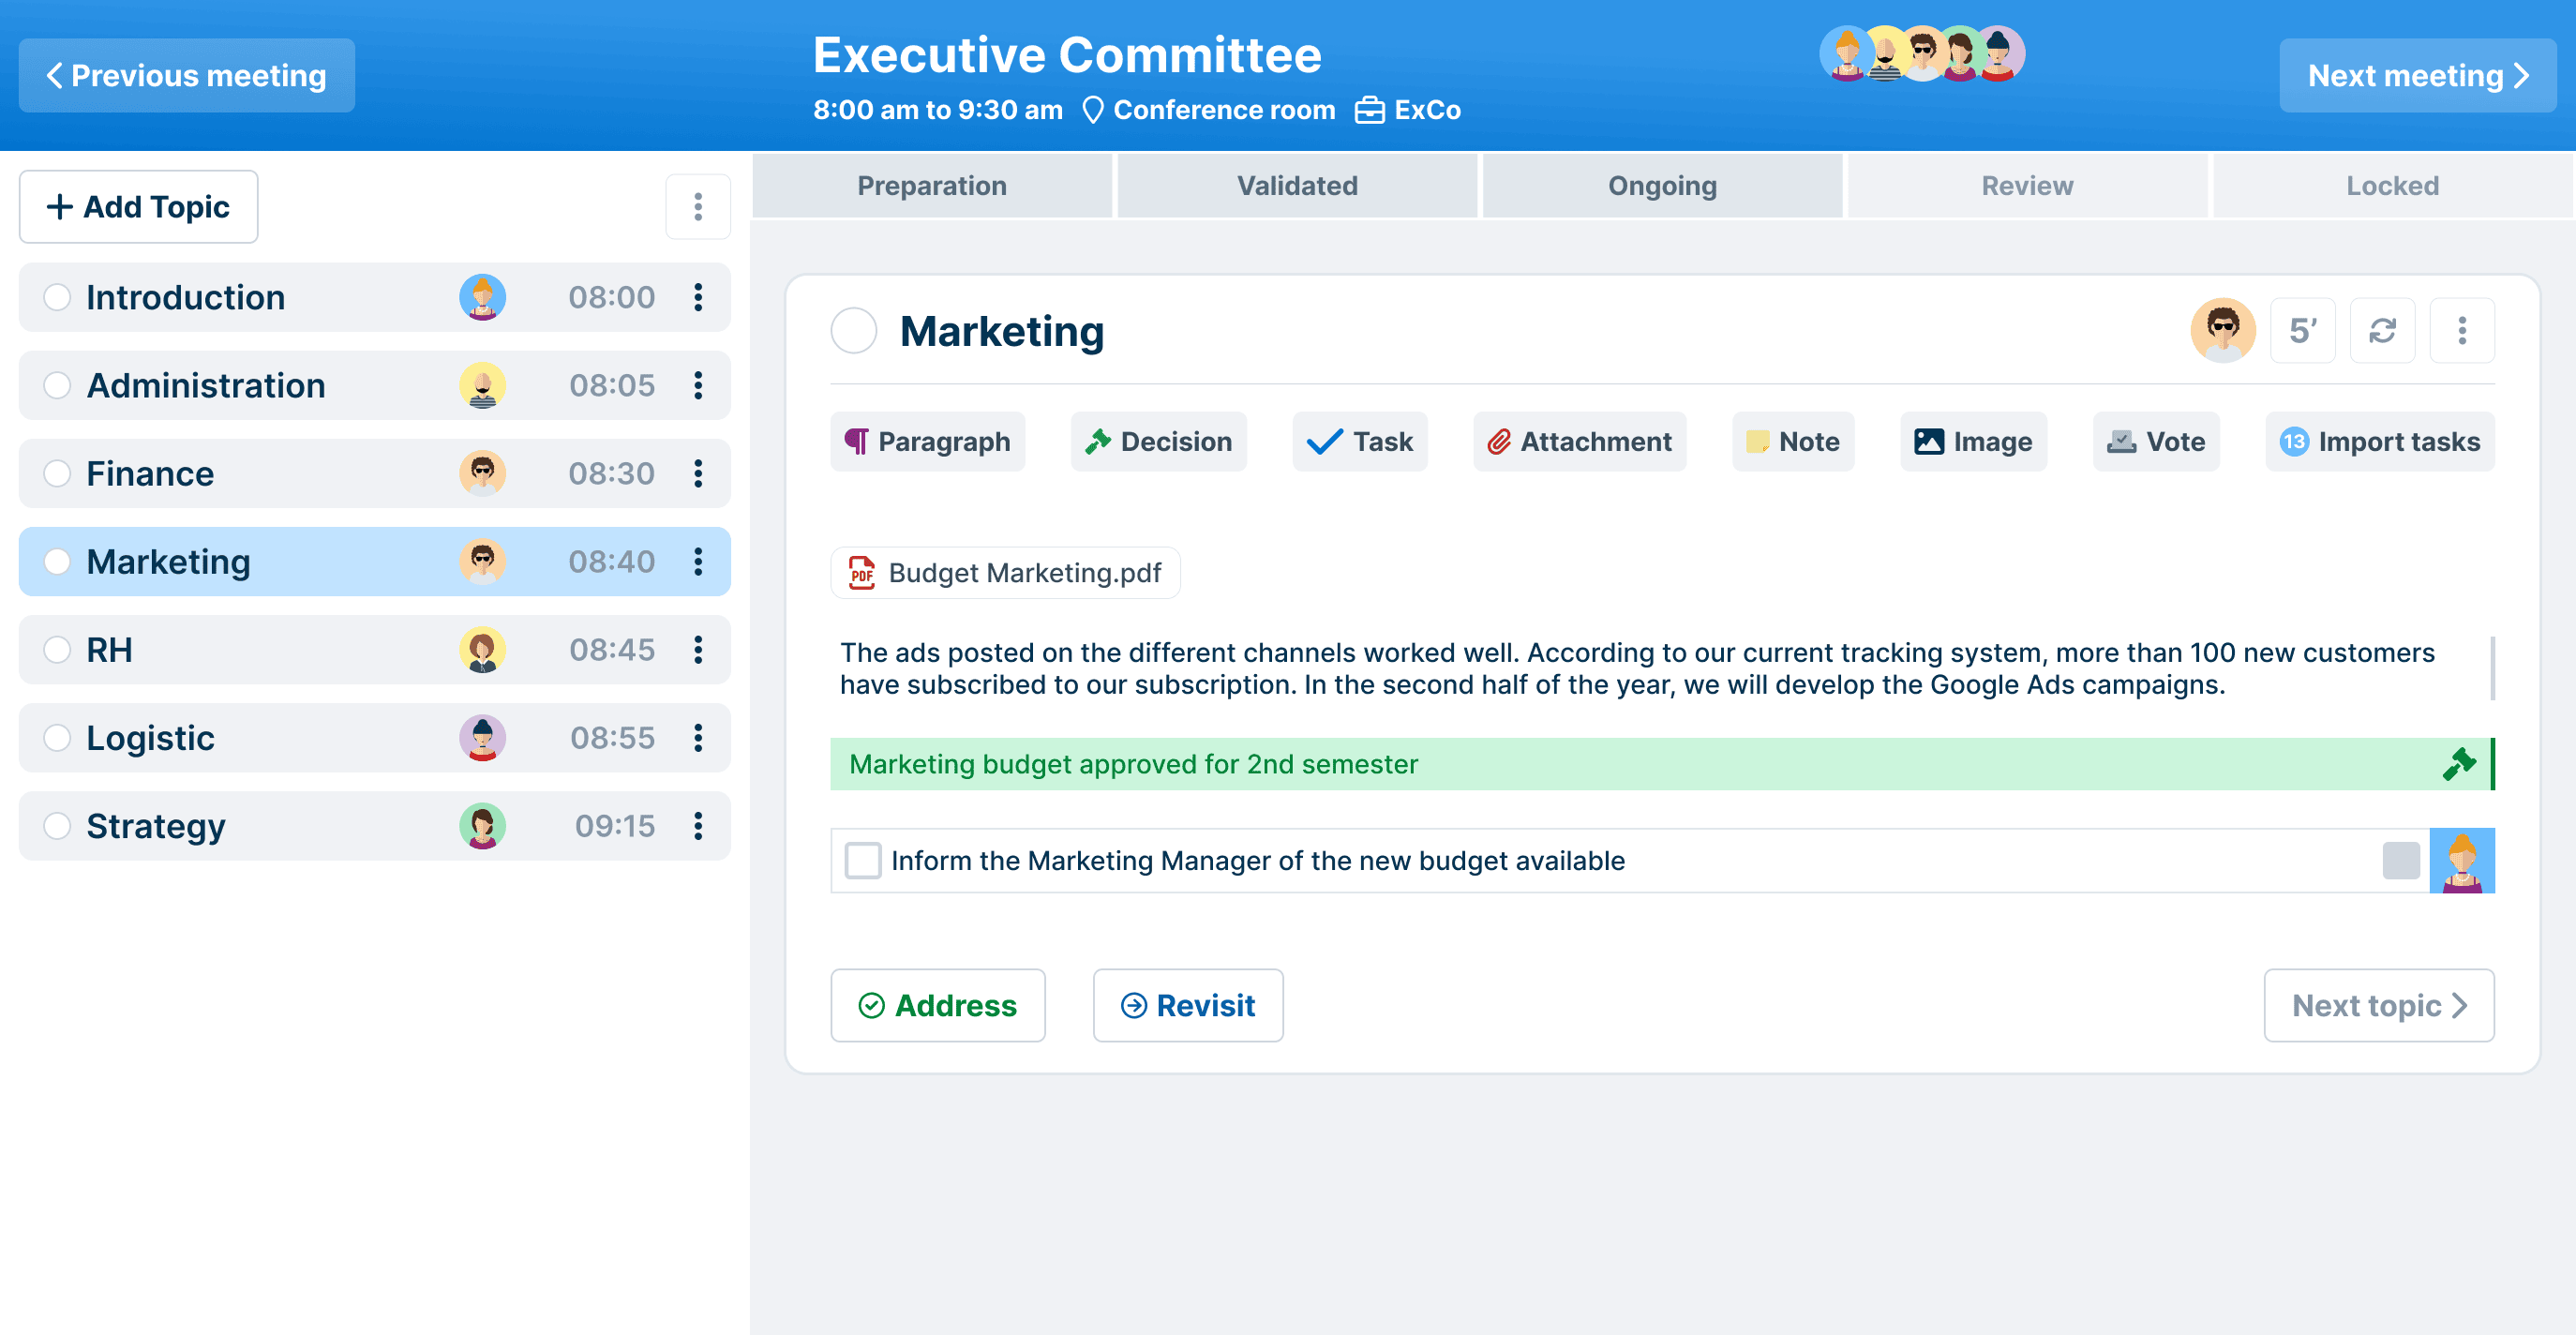 WEDO is made for Executive Assistants